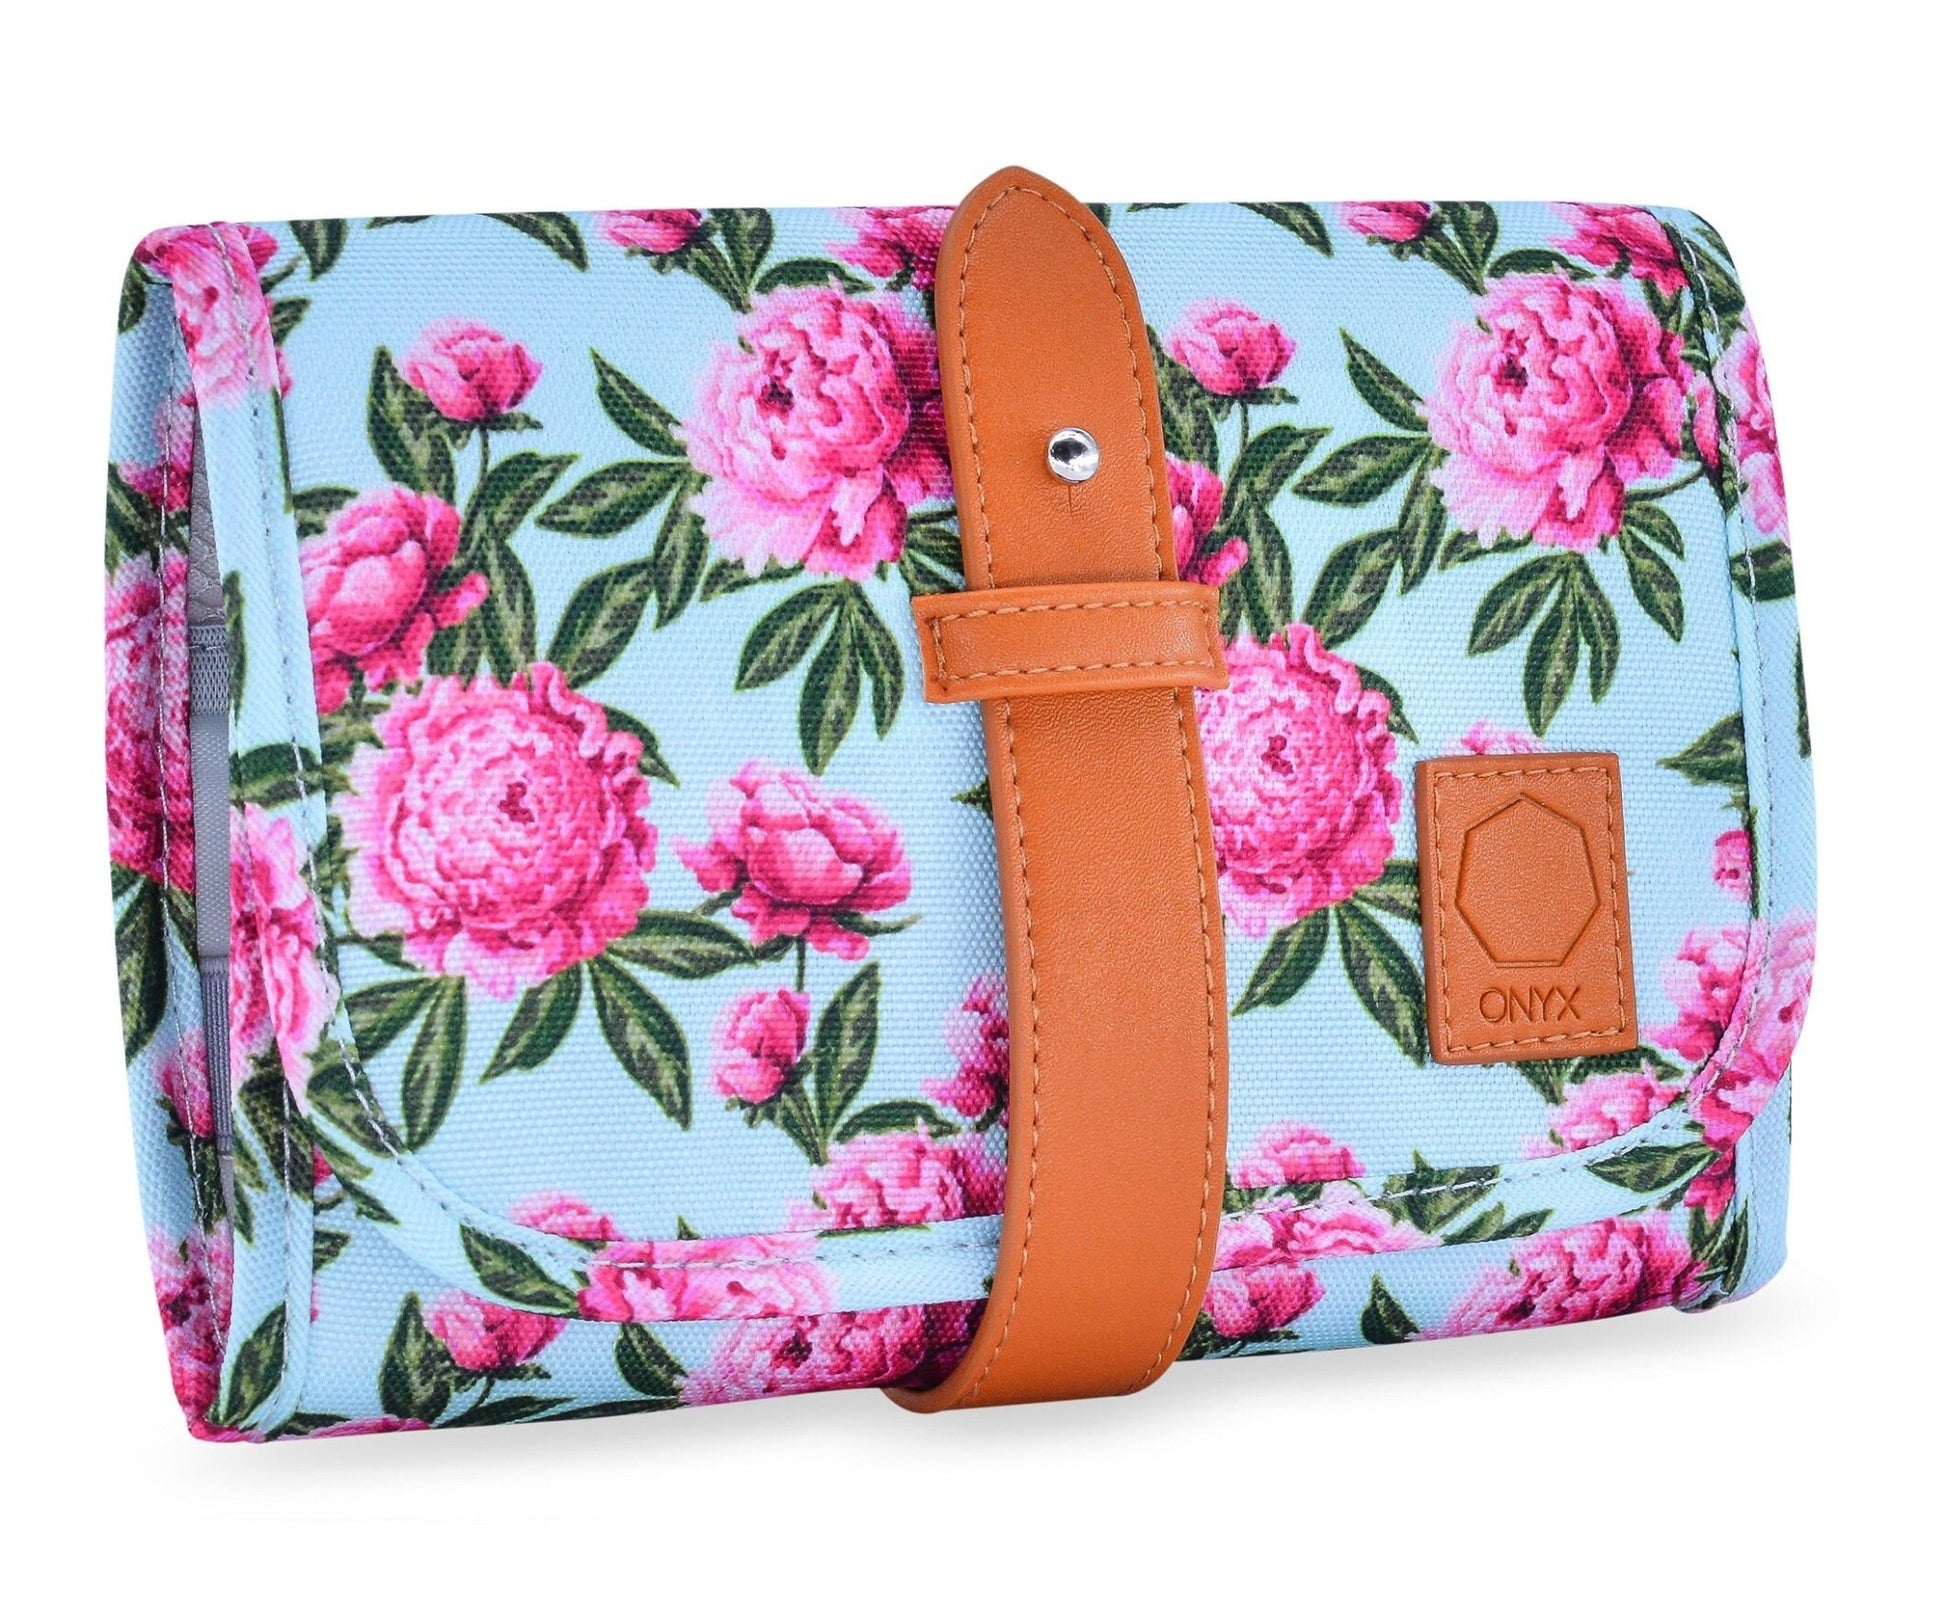 Olive, Blue, & Floral Electronics Organizer Bag – Portable Travel Accessories Case for Chargers, Cords, Cables, Batteries and More!